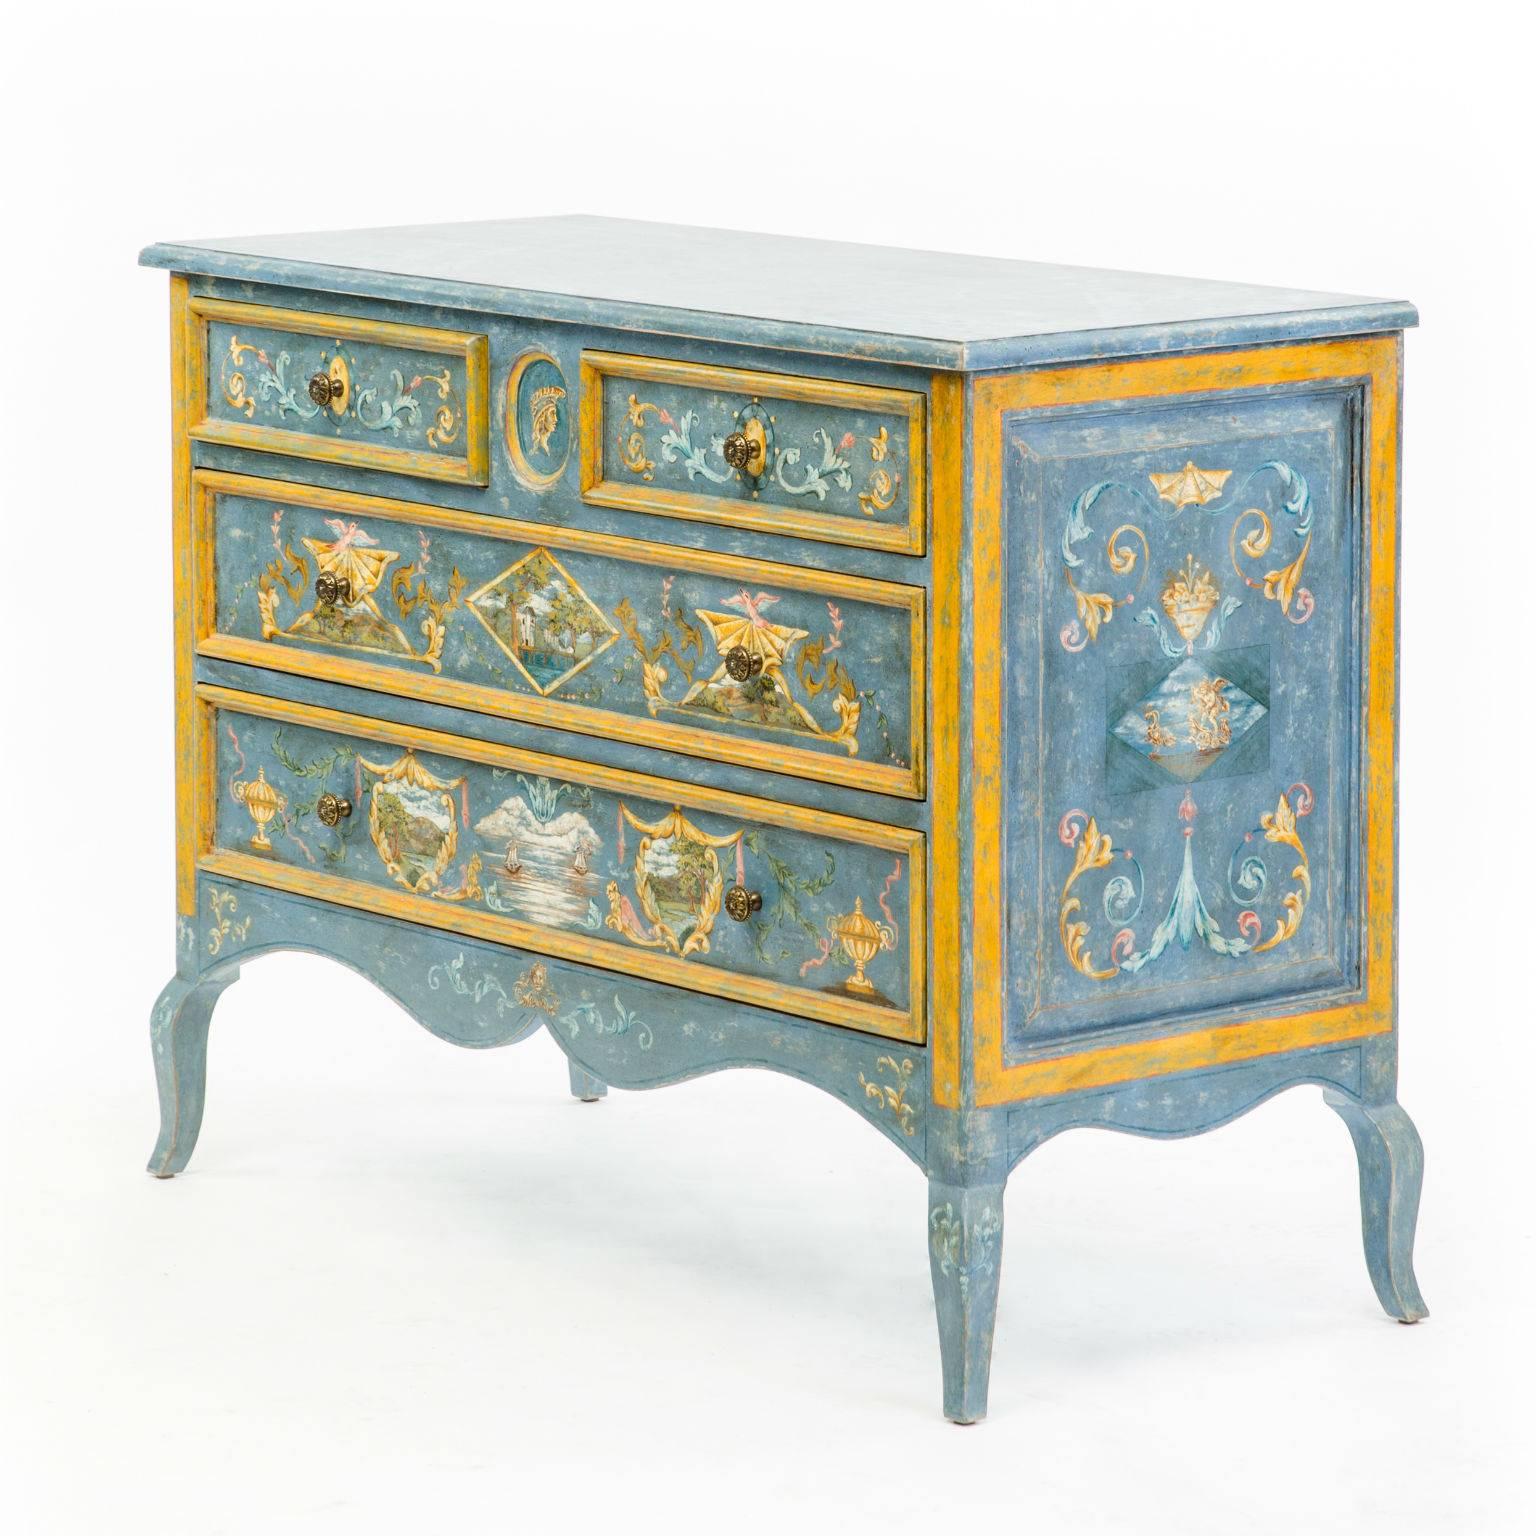 A pair of beautiful 18th century style Paolo Romano four-drawer chests that have been hand-painted with a custom Romano finish and Roman motifs. Originally from Florence, Italy and in fantastic condition.